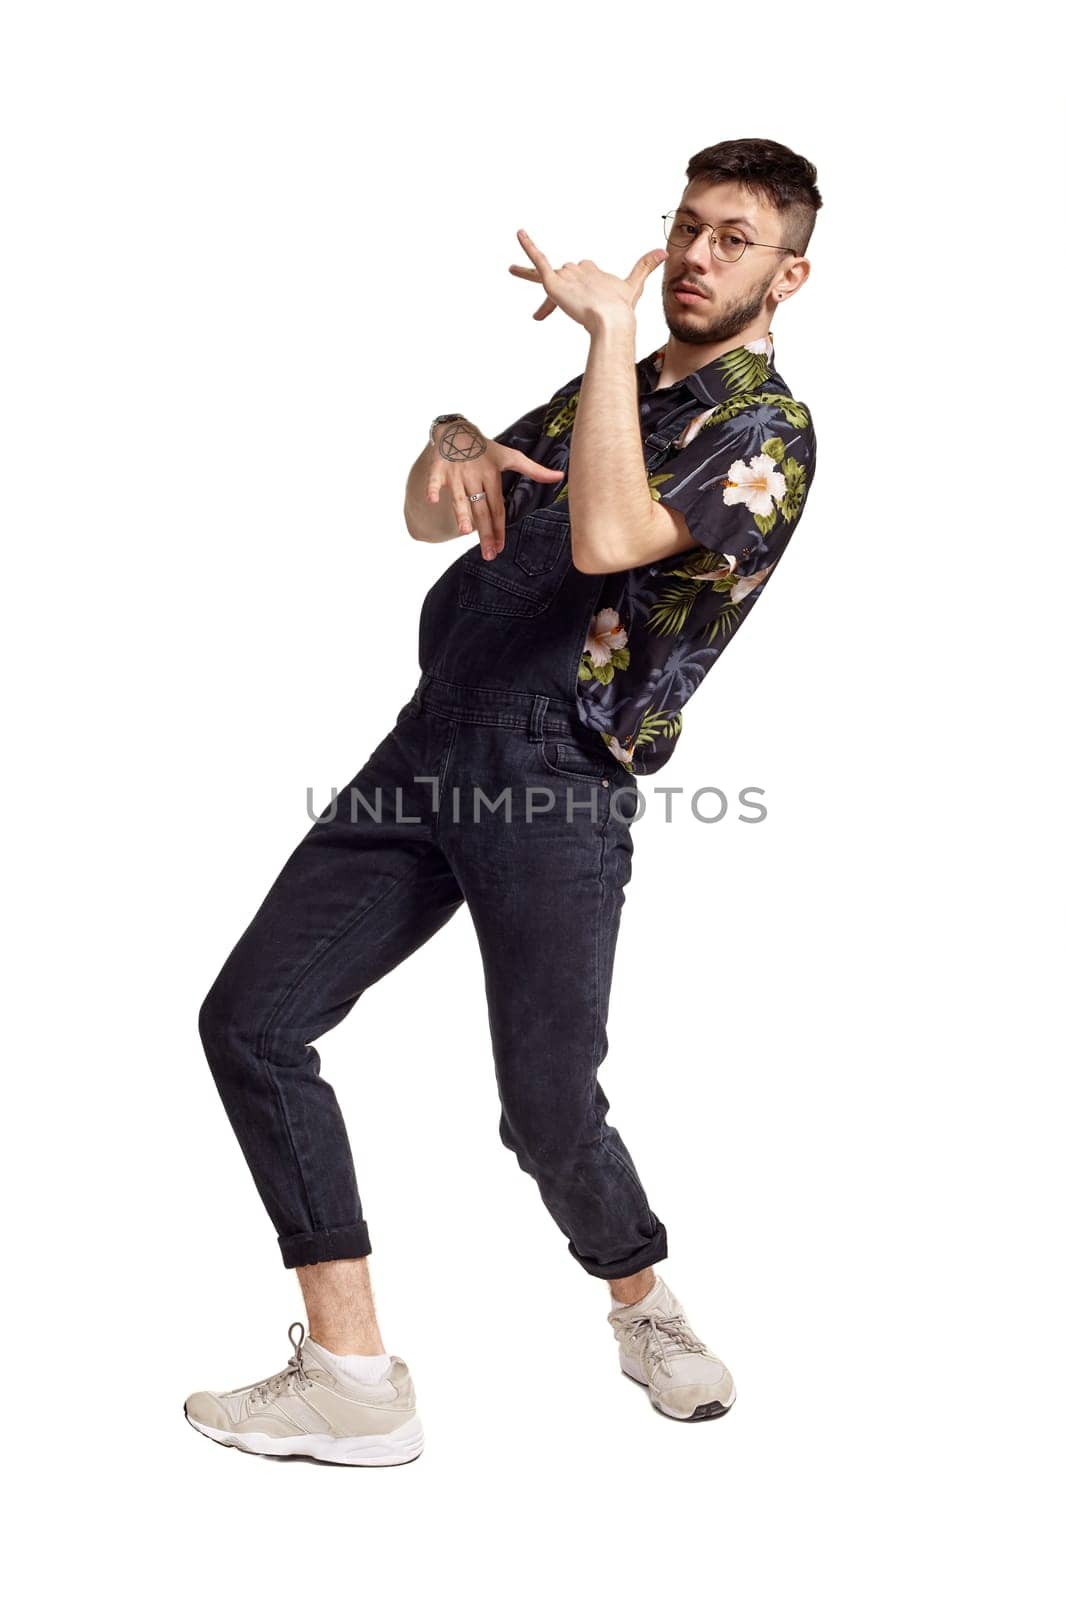 Full-length portrait of a graceful dancer in glasses, black jumpsuit, colorful t-shirt and gray sneakers fooling around in studio. Indoor photo of a man dancing sideways isolated on white background. Music and imagination.